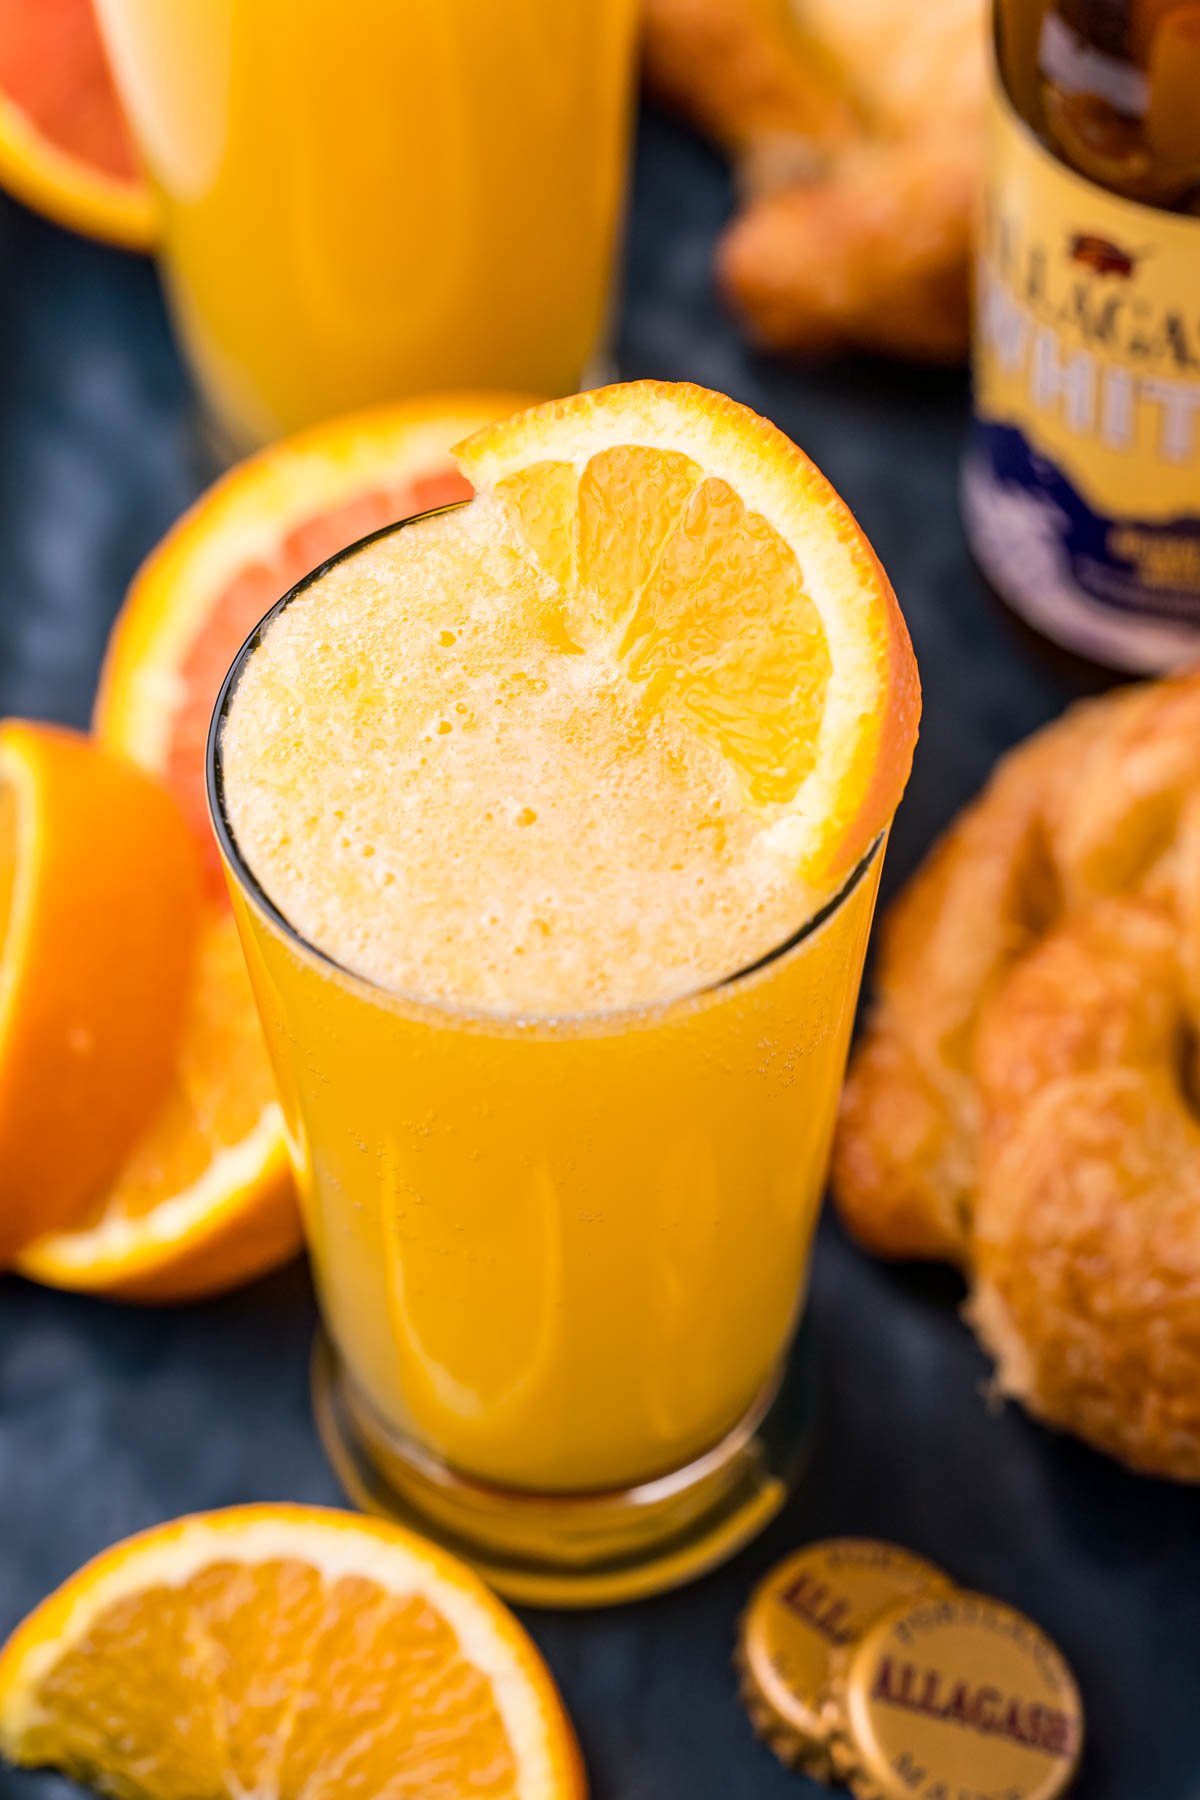 Close up photo of a beermosa surrounded by orange slices and croissants.